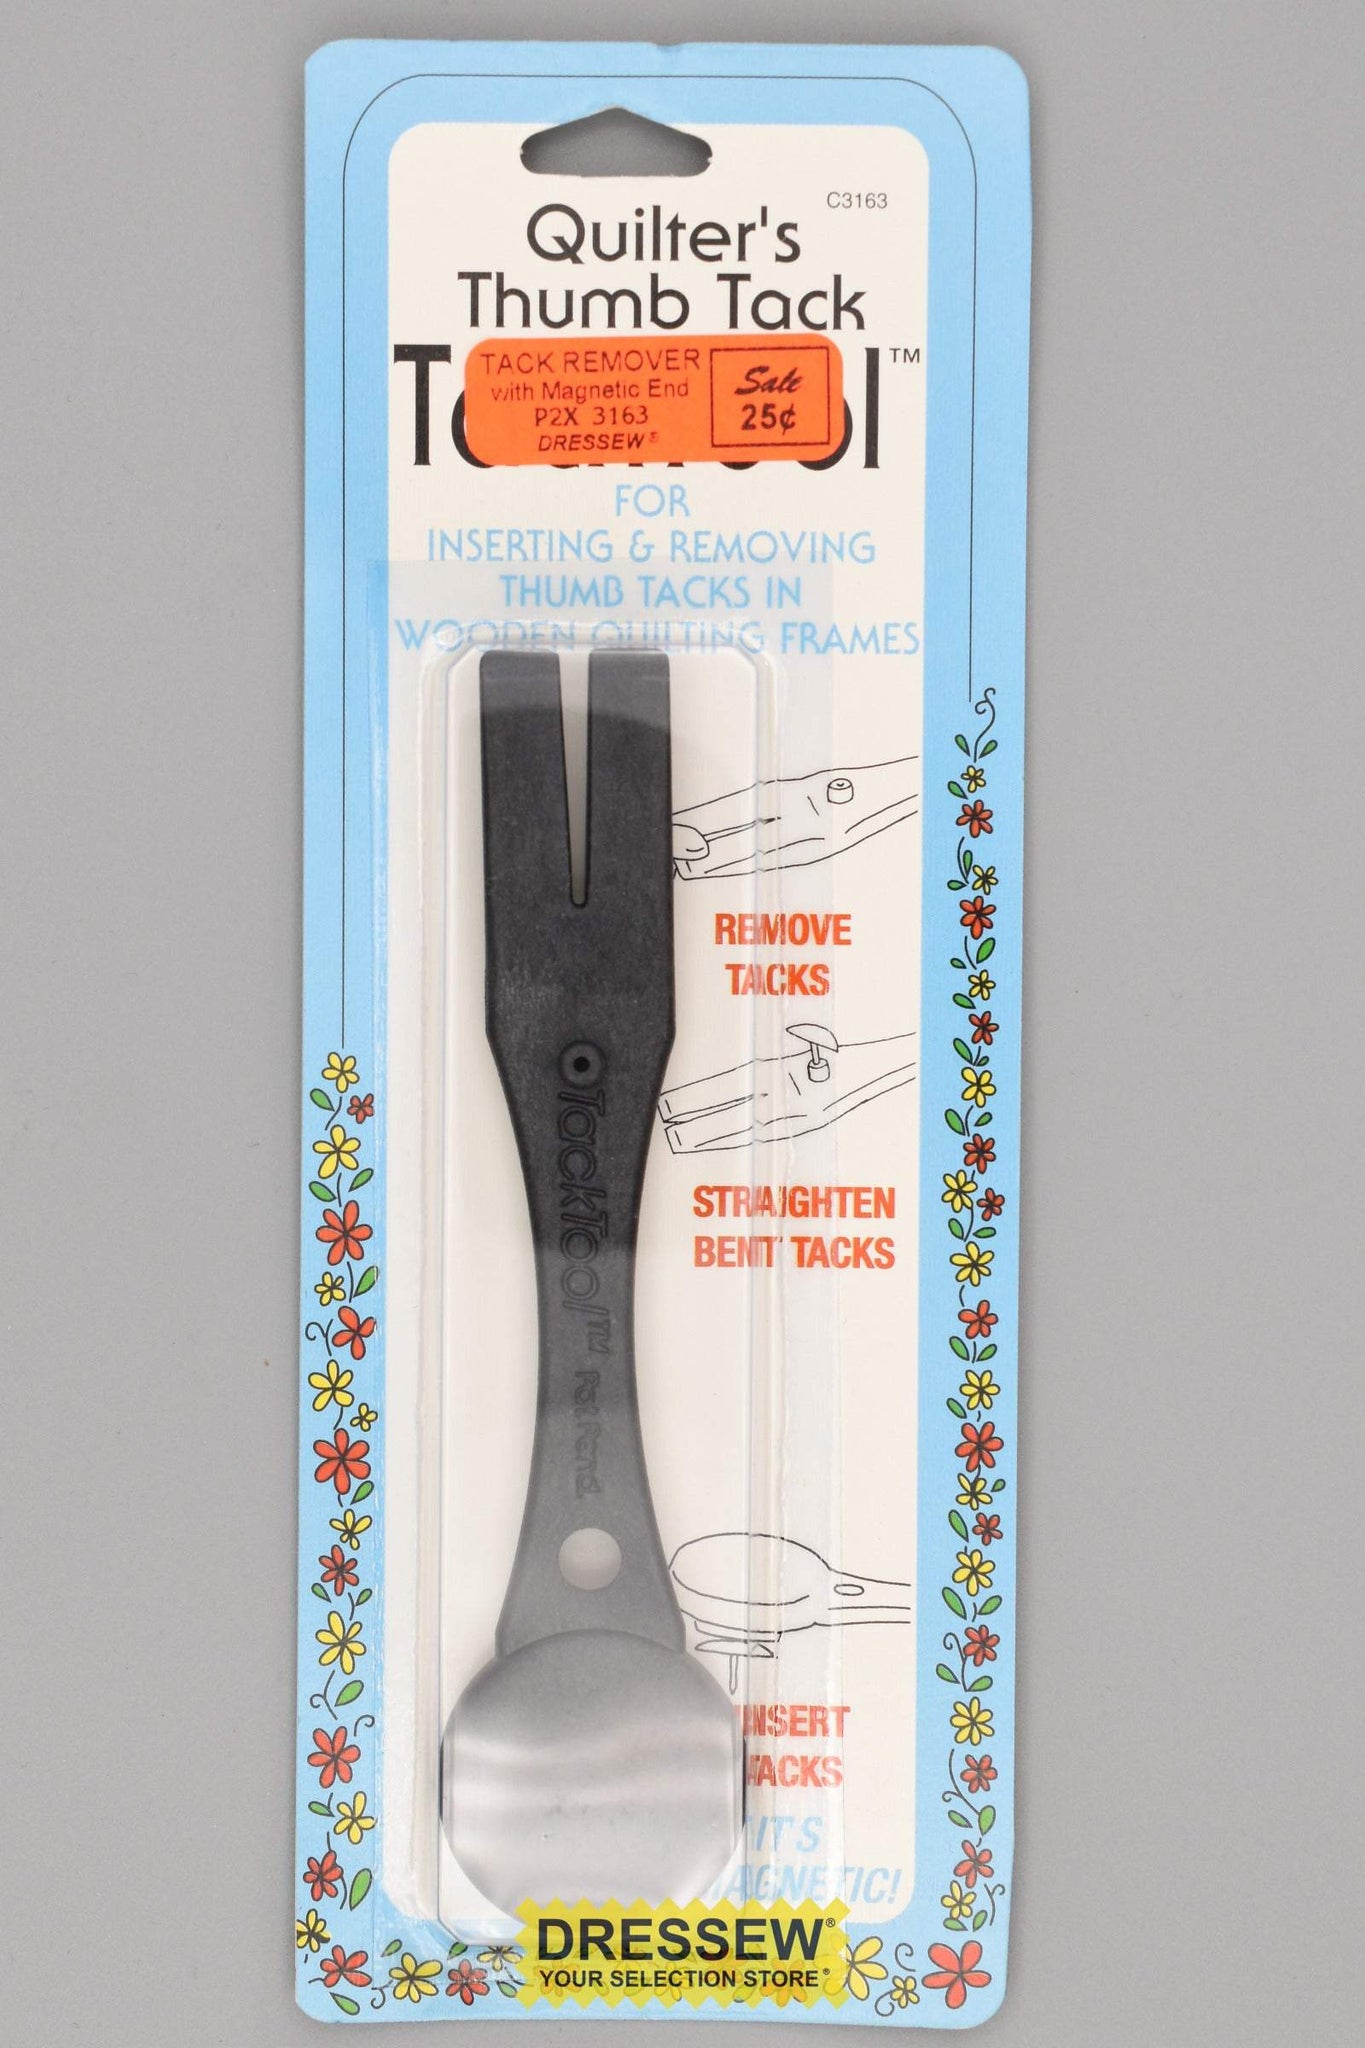 Tacktool Tack Remover with Magnetic End